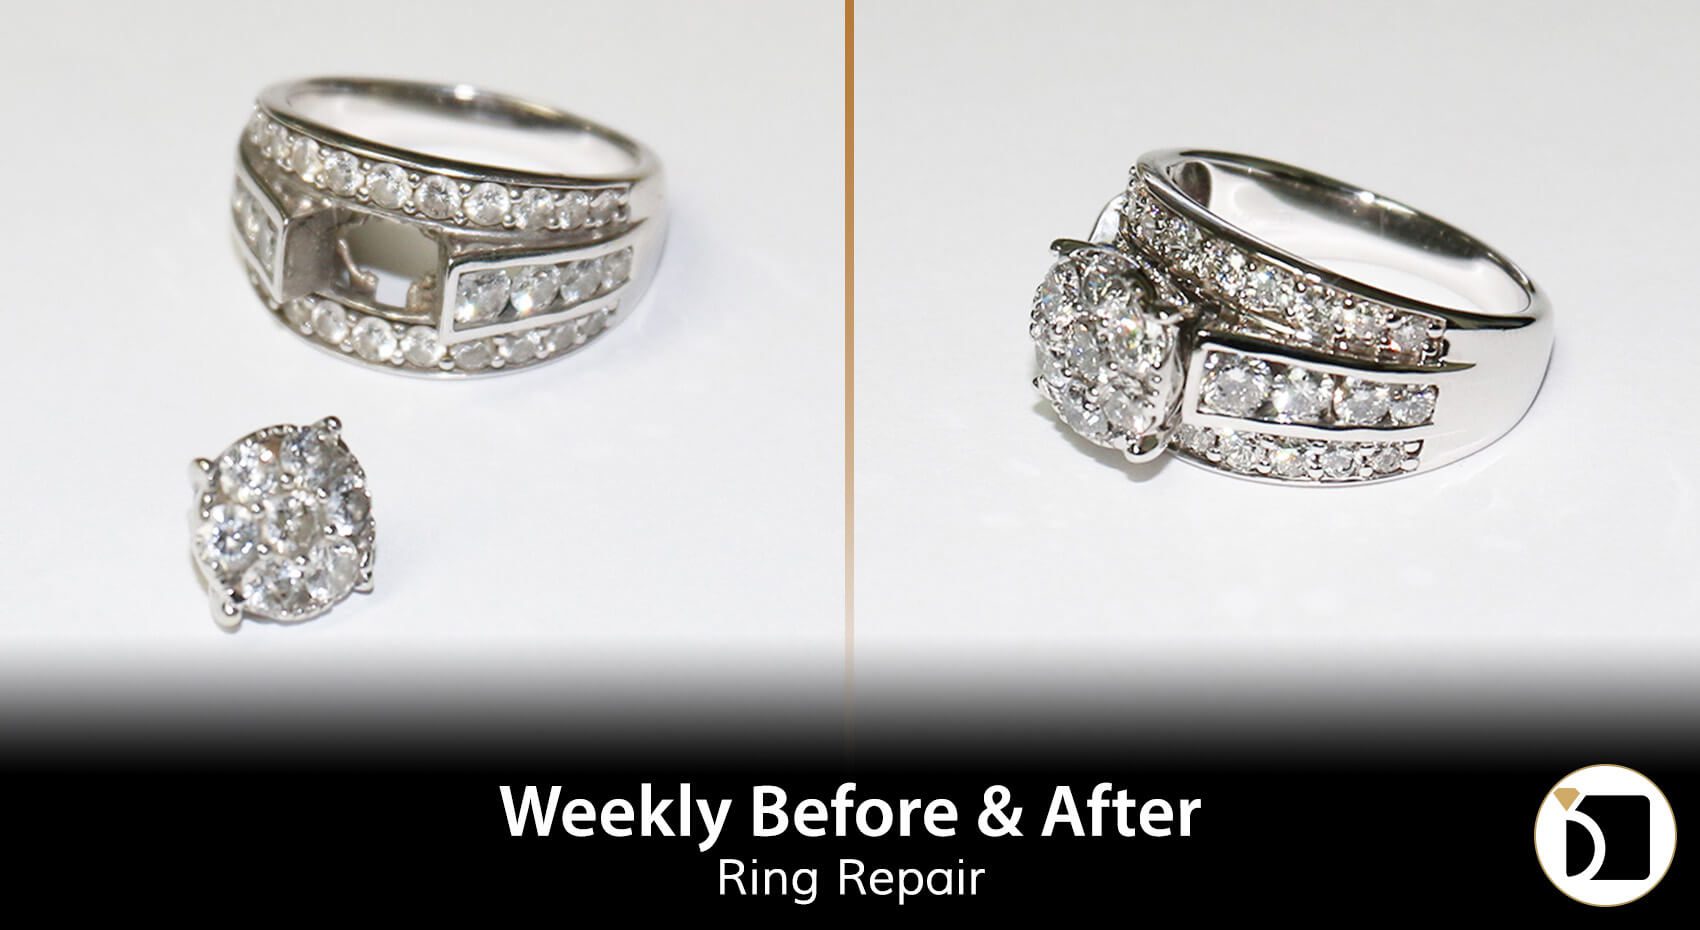 Image Showcasing a Diamond Ring Repair. Weekly Before After 97